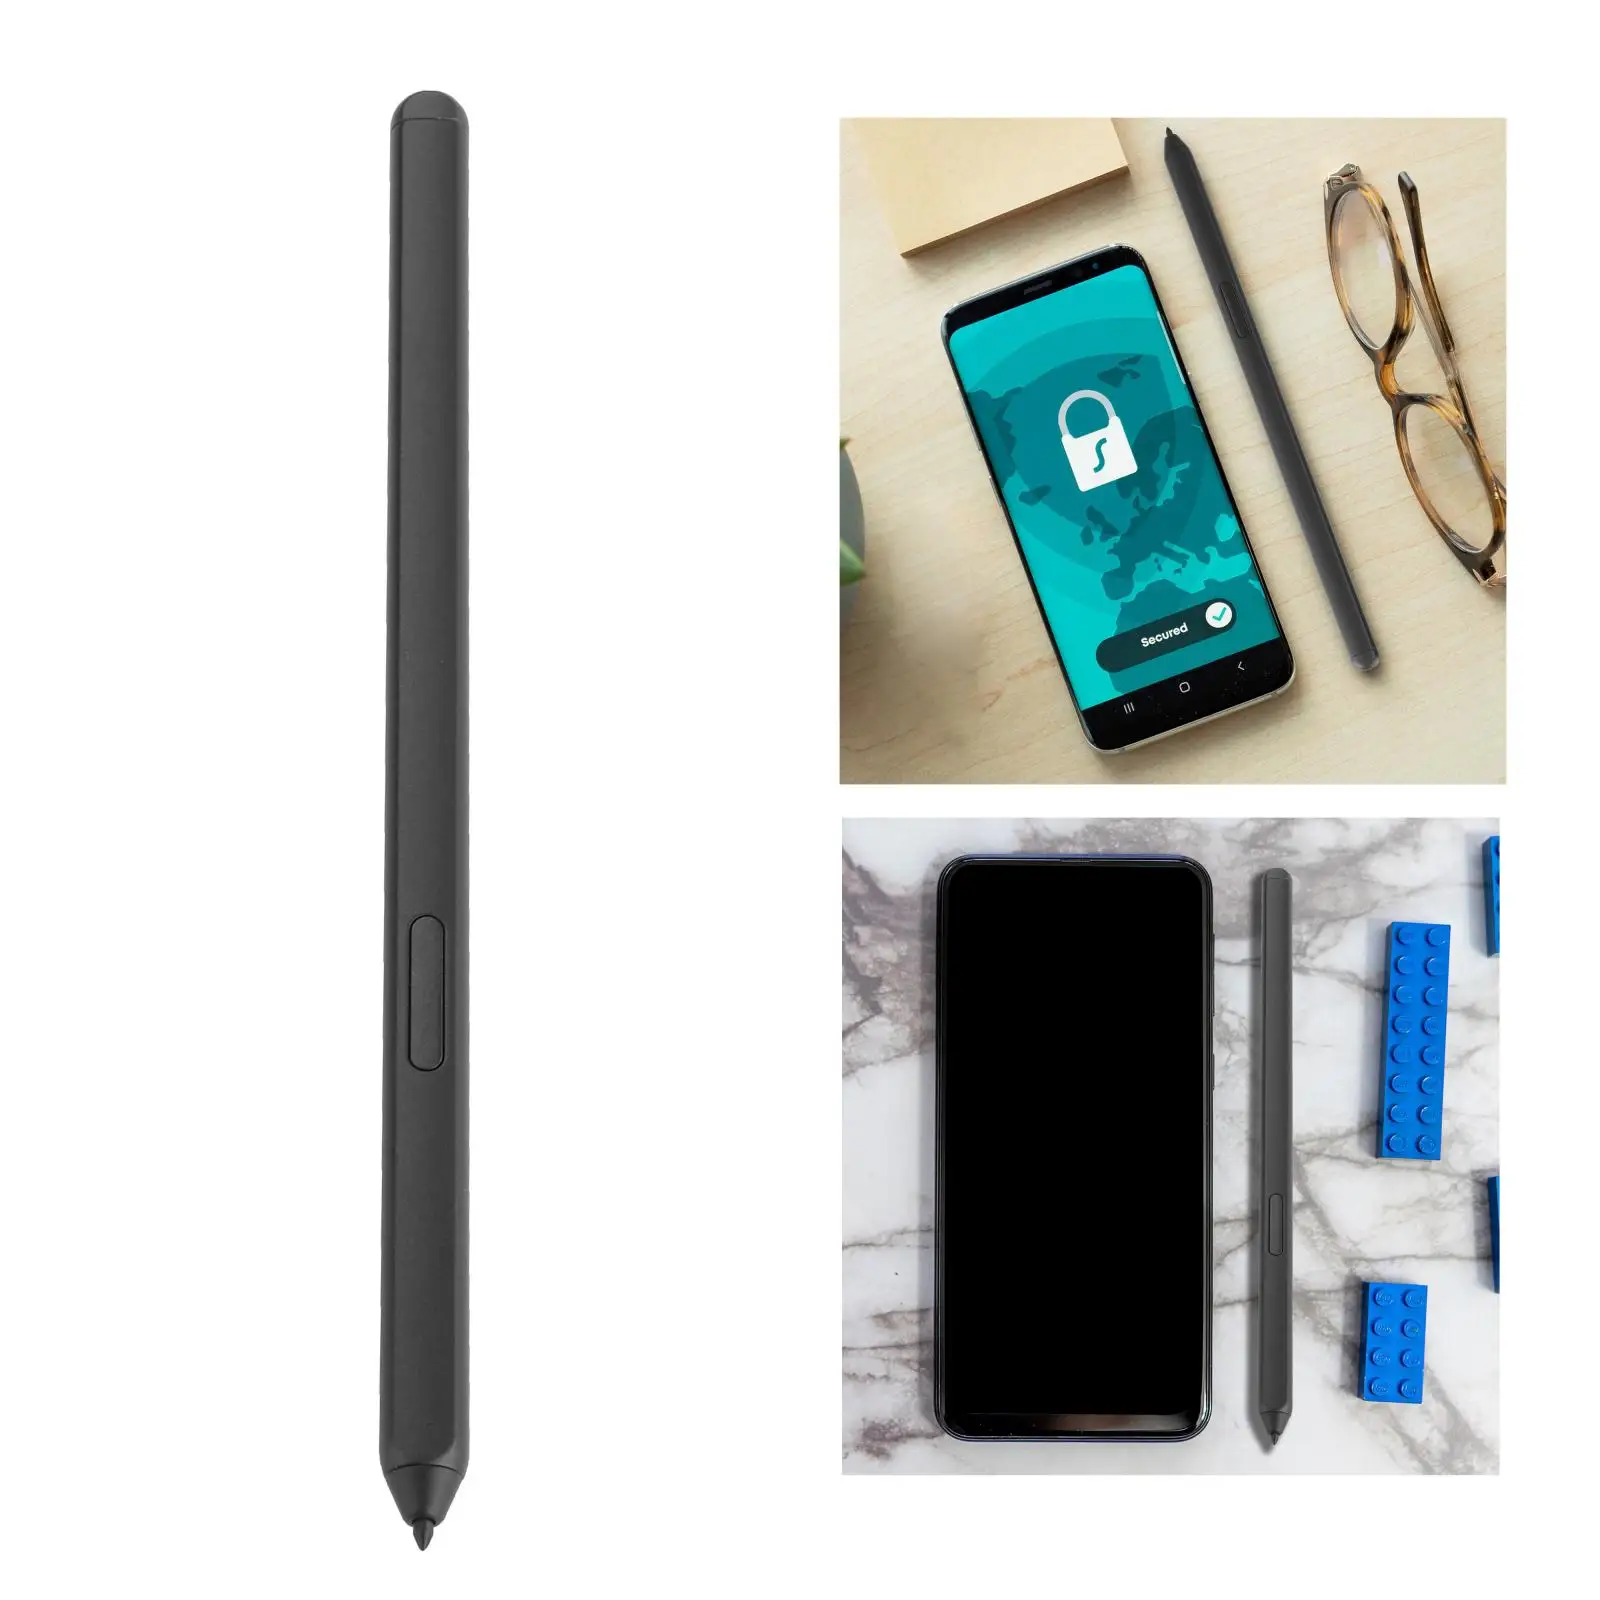 Stylus Electromagnetic Pen Suitable for S21 Mobile Phone Screen Stylus Soft Head Natural Grip for Writing Drawing